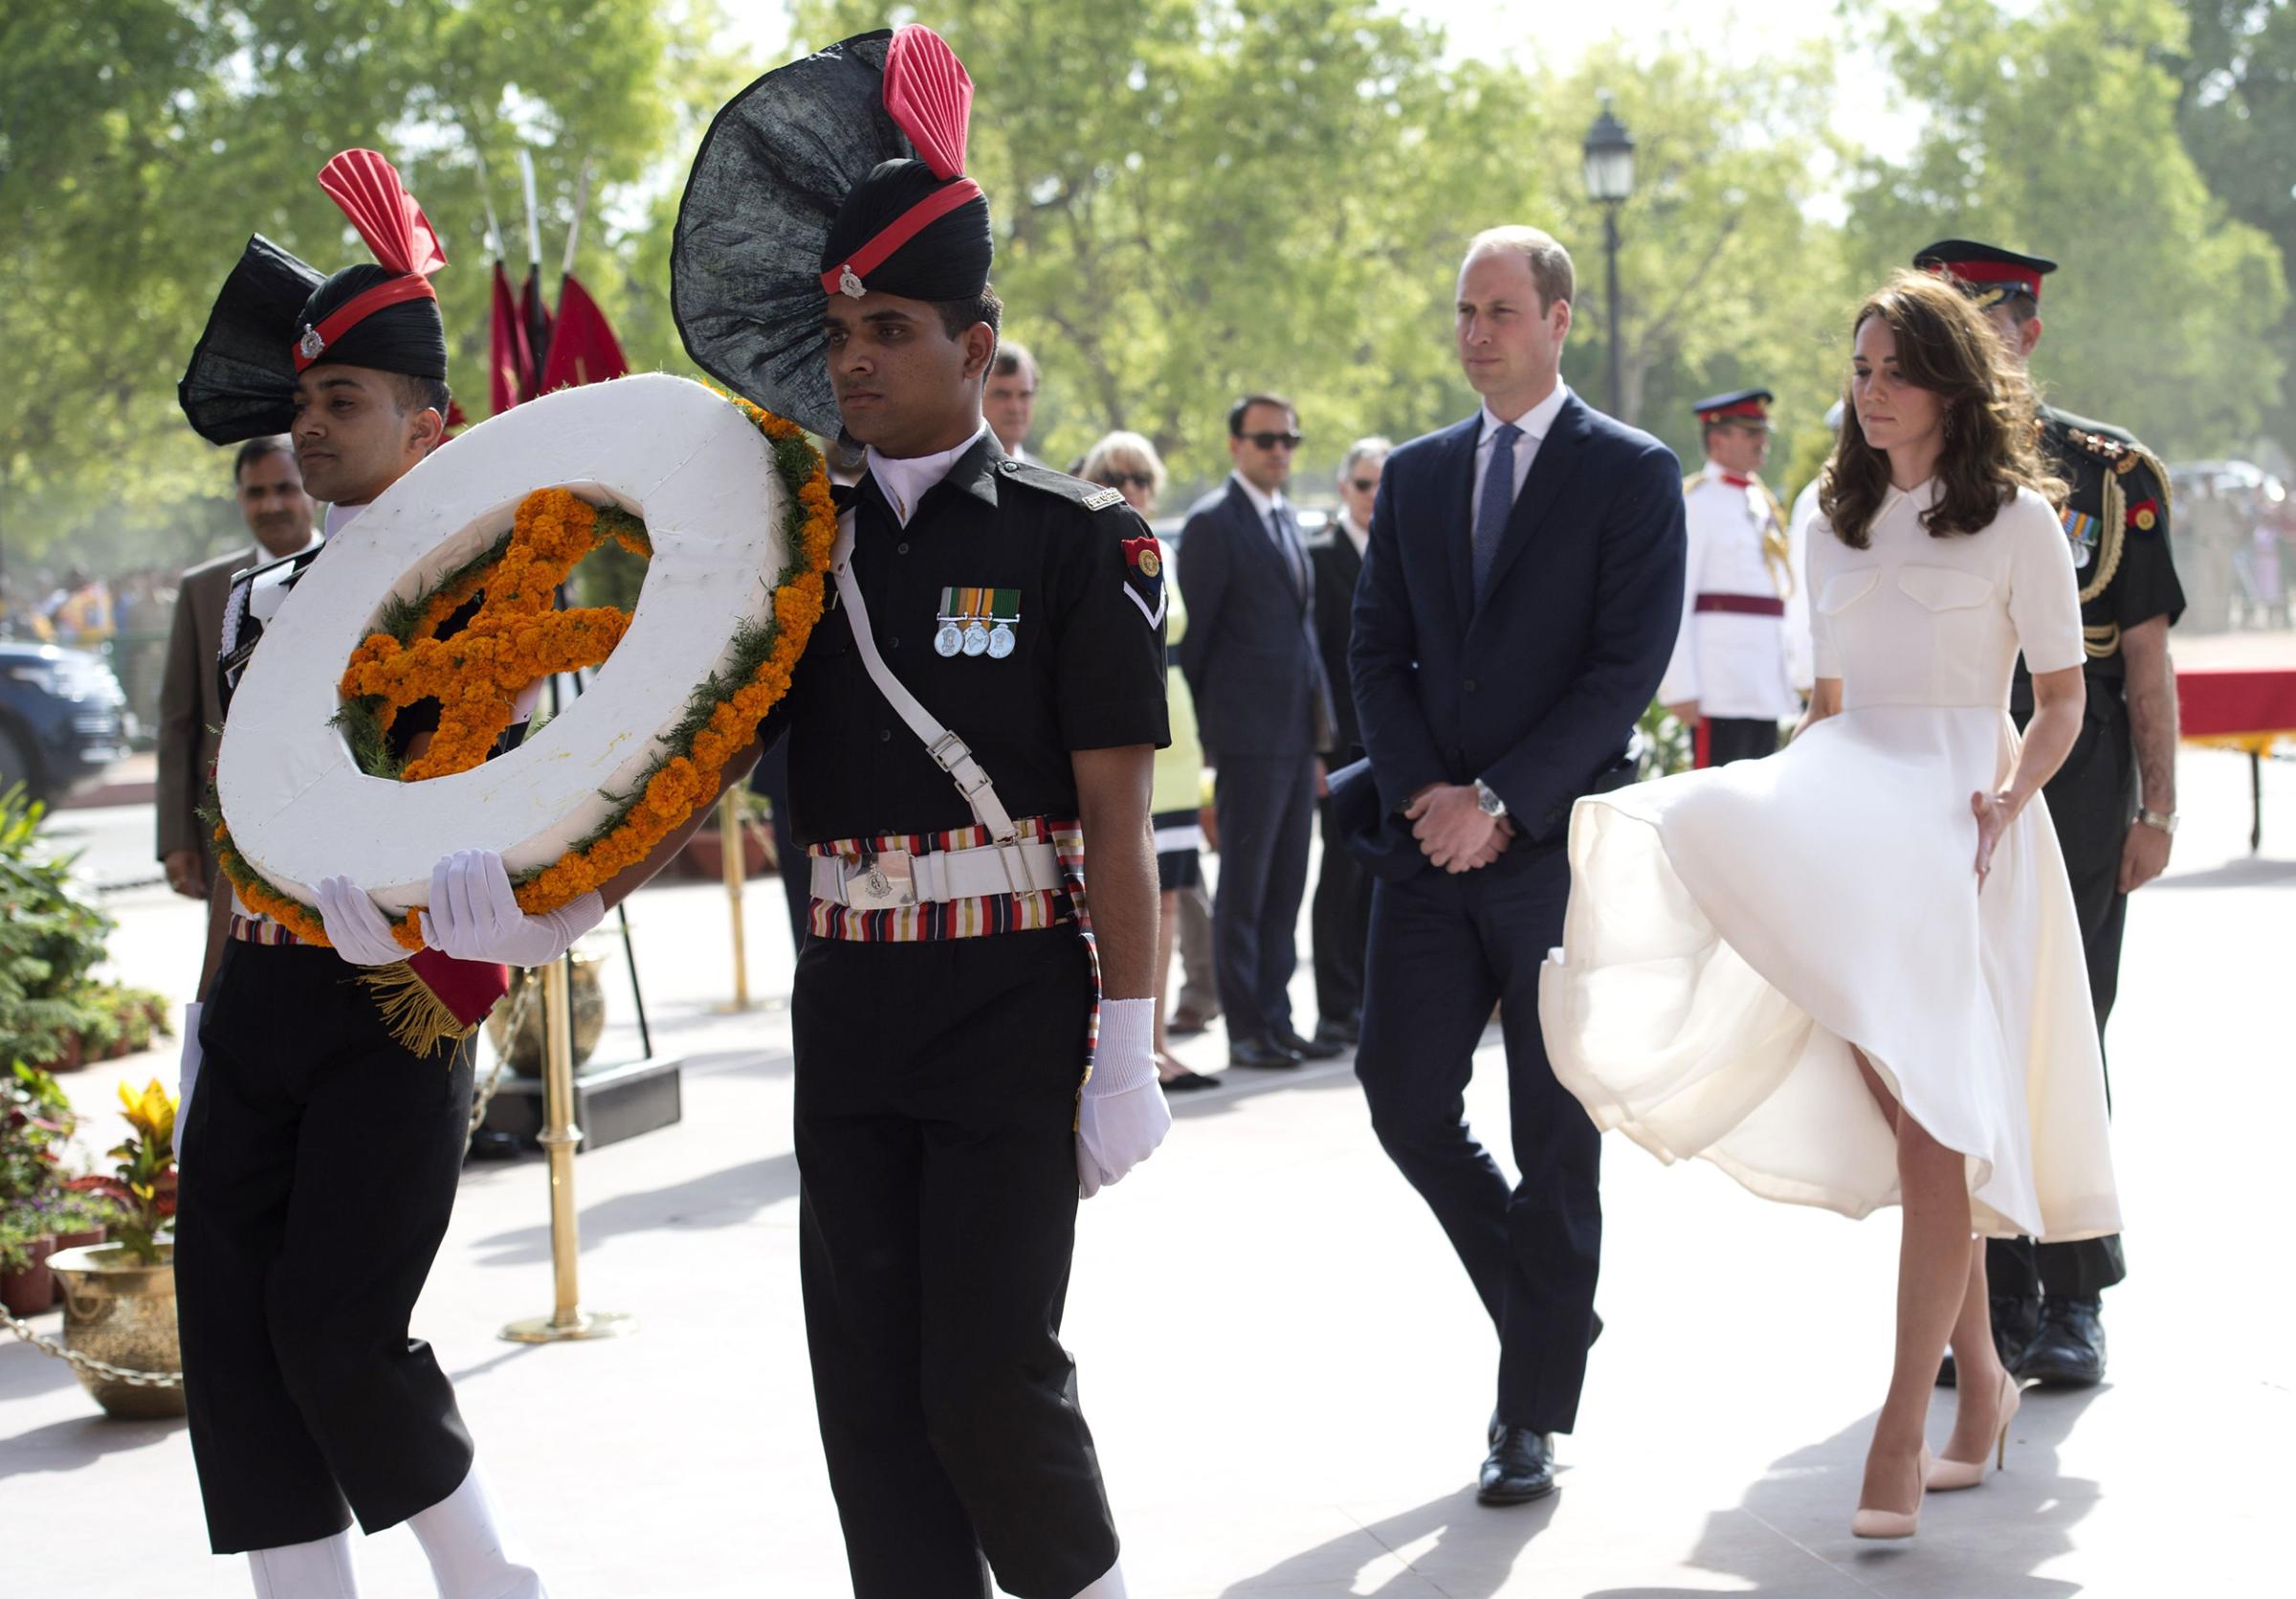 Prince William and Catherine, Duchess of Cambridge at a wreath-laying at India Gate, New Delhi on April 11, 2016.